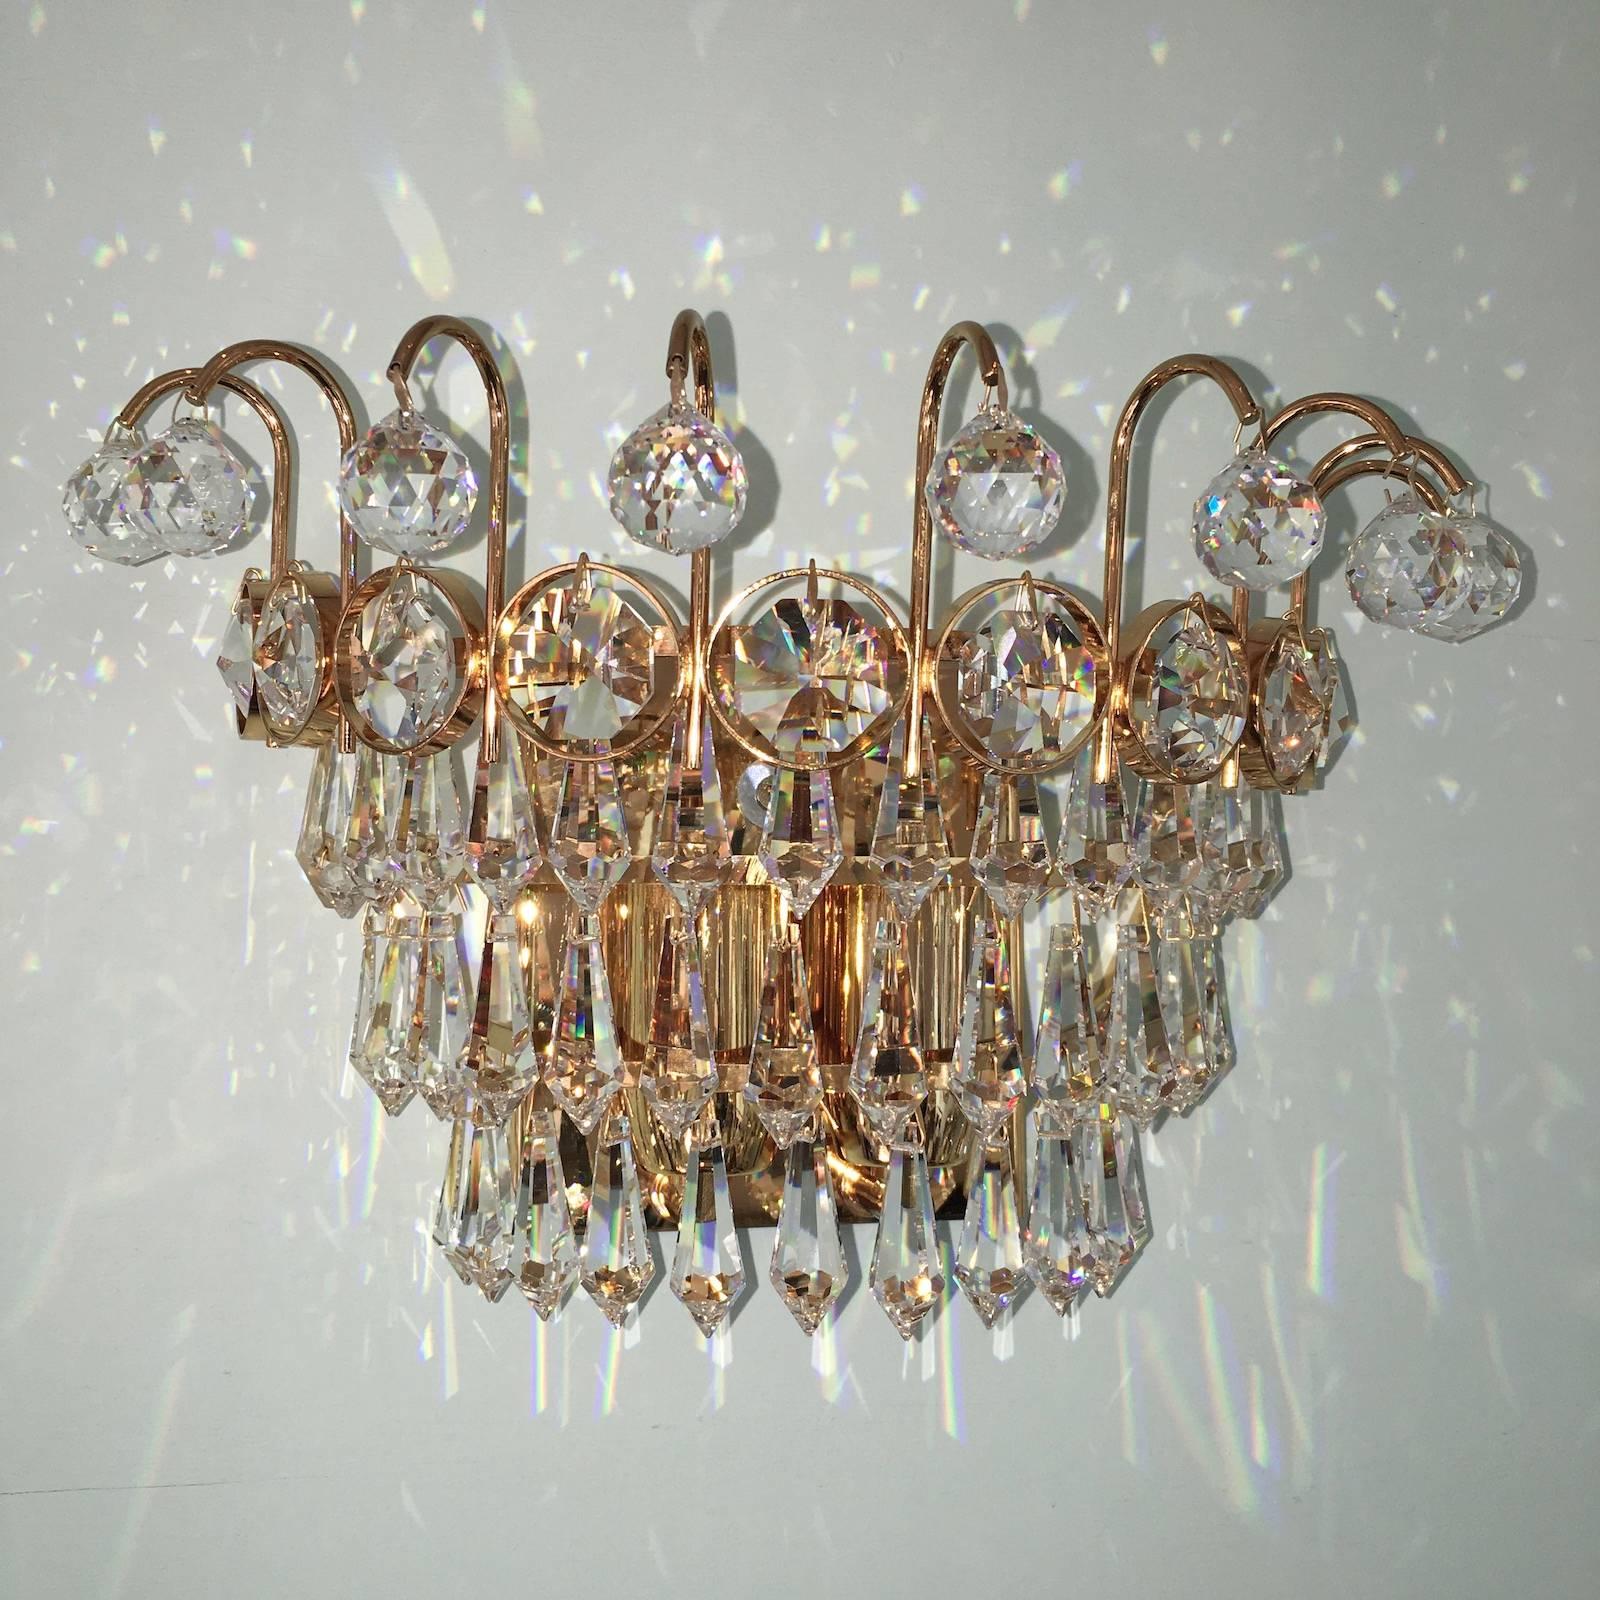 A beautiful pair of handcrafted sconces, manufactured in the 1970s by Palwa of Germany. Made of gold-plated brass with faceted crystal glass petals. Each Fixture requires two European E14 candelabra bulbs each up to 40 watt.